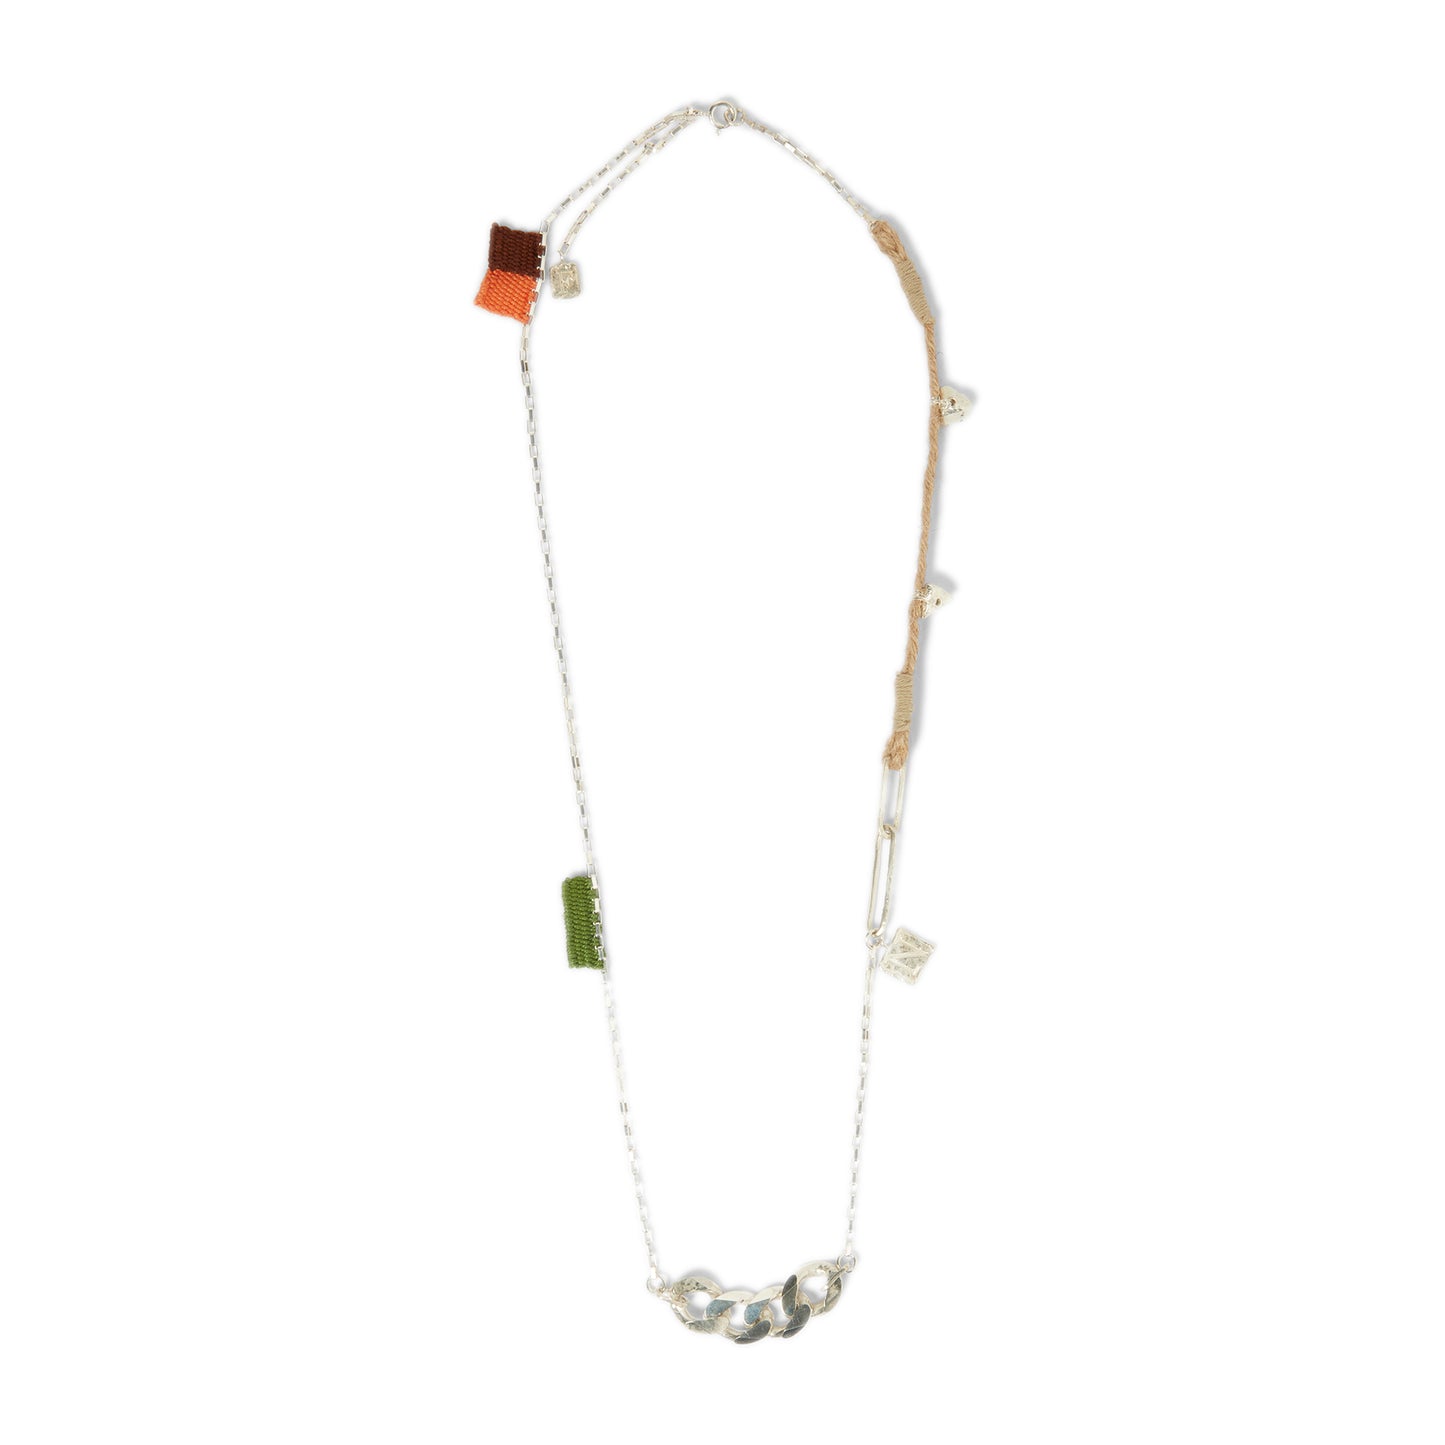 Lido Necklace  Silver 925 box chain with NF pendants   Centered curb chain   Braided twine with silver nuggets   Handmade multicolored embroidery pendants   Made in Italy